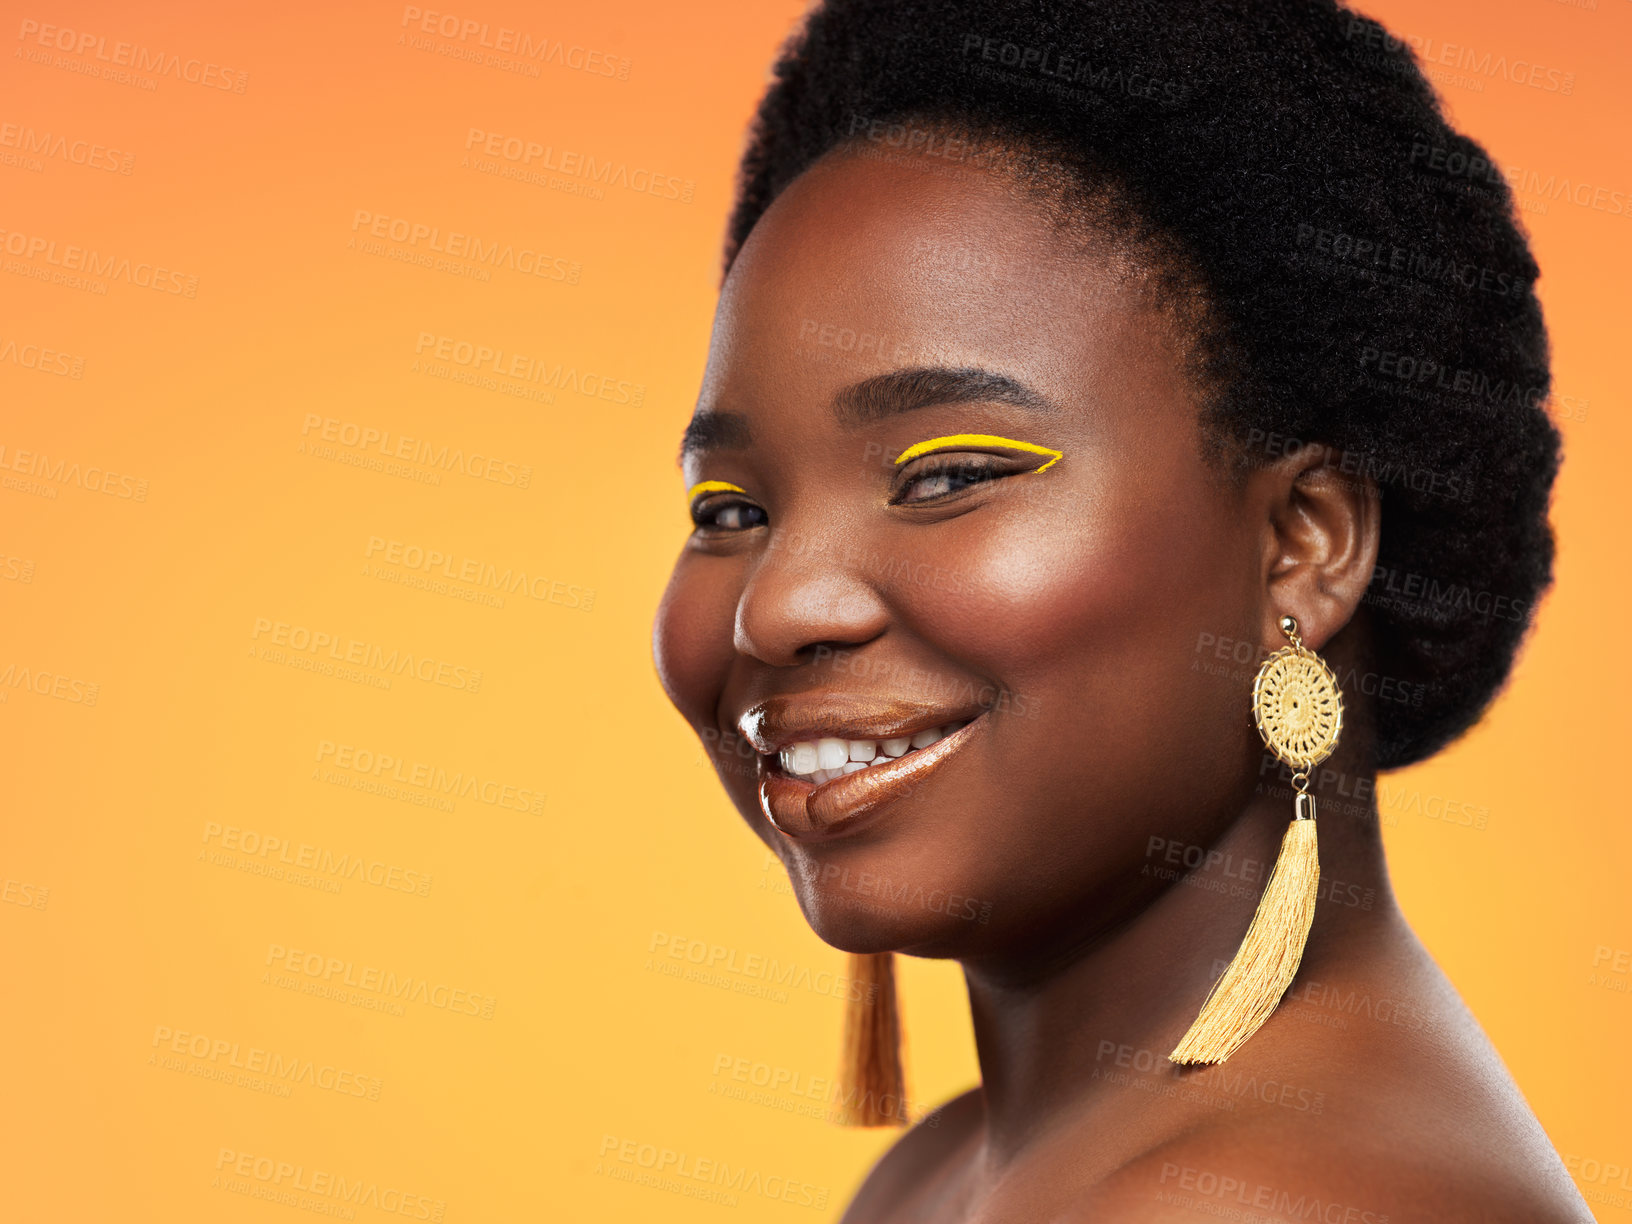 Buy stock photo Studio shot of a beautiful young woman posing against an orange background